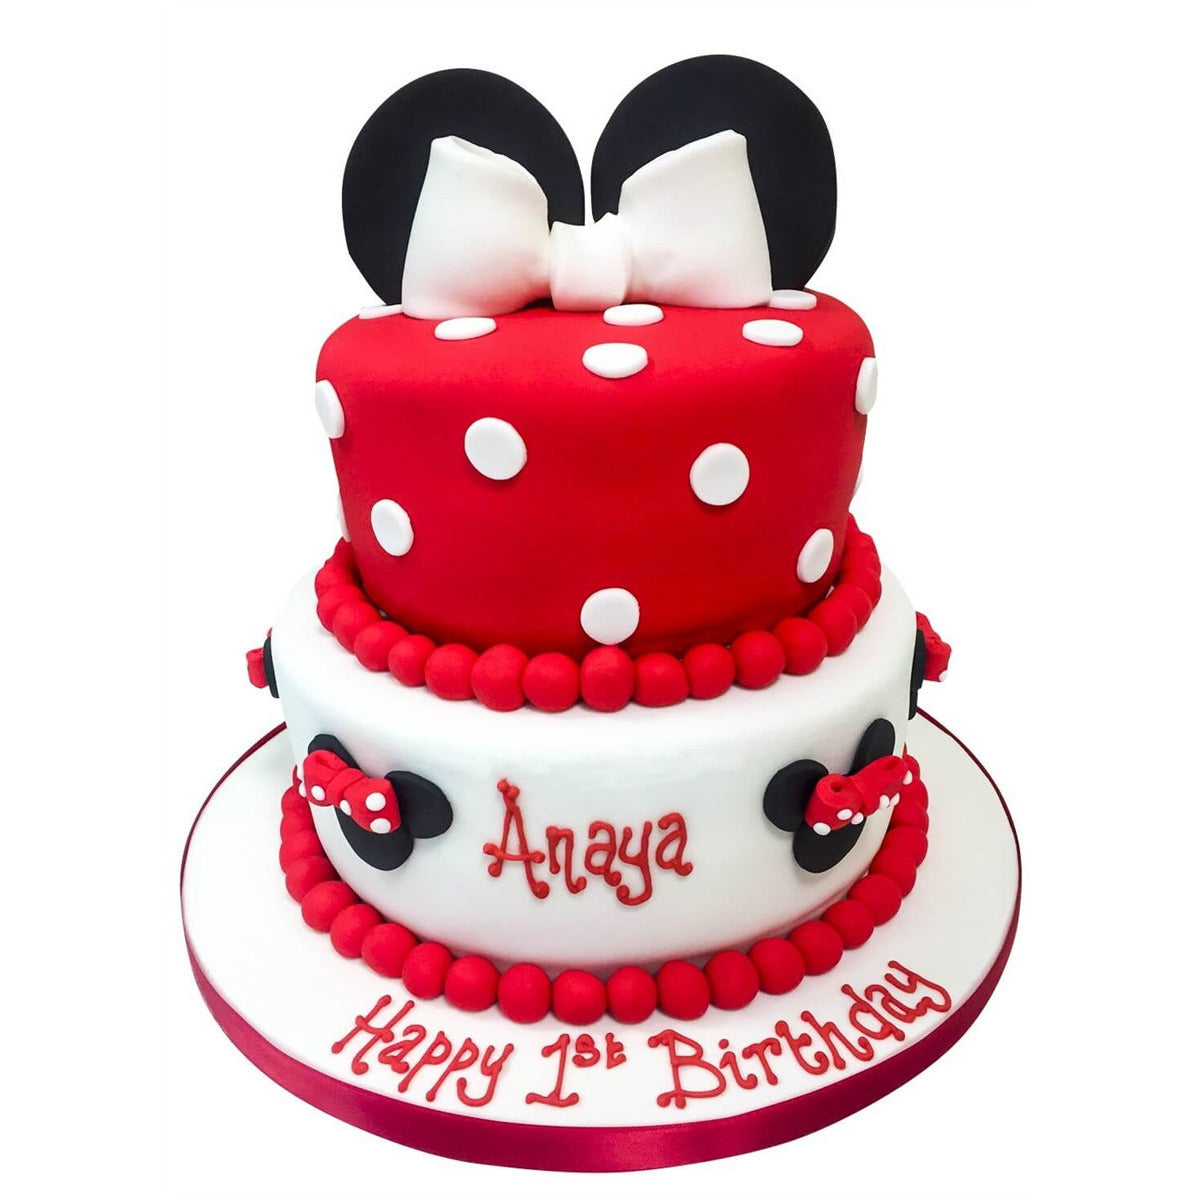 Minnie Mouse Cake - Buy Online, Free UK Delivery — New Cakes